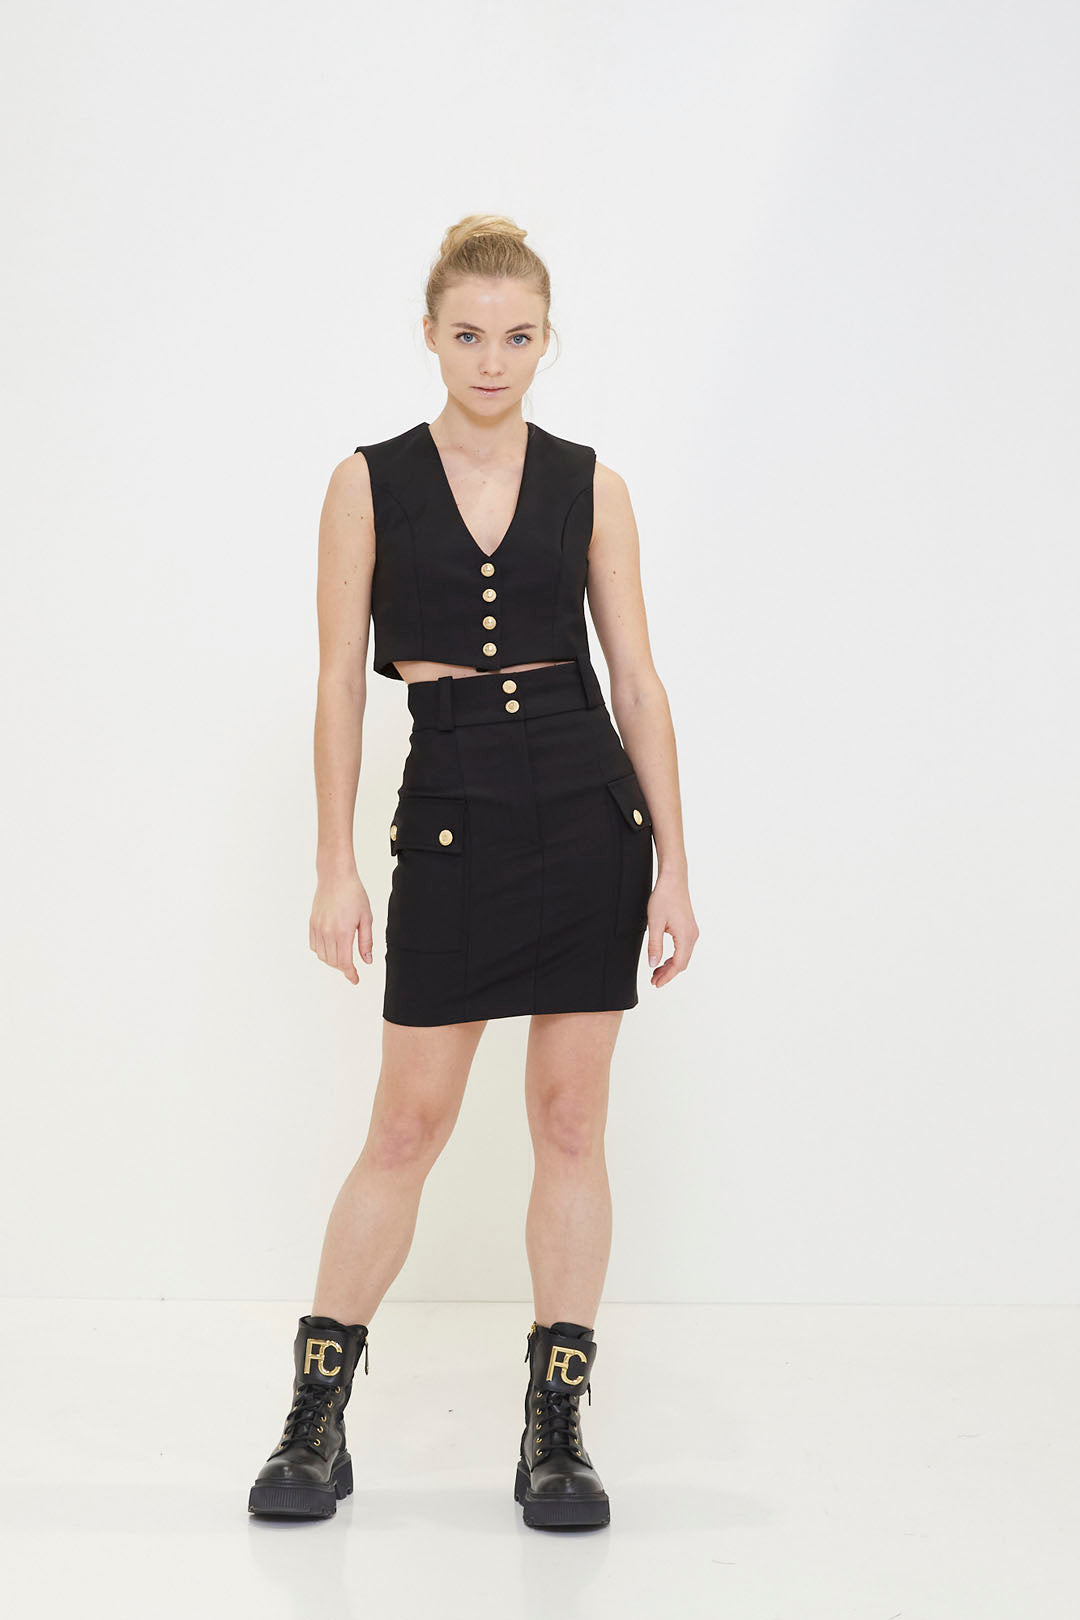 Black stefy skirt in technical fabric with gold buttons